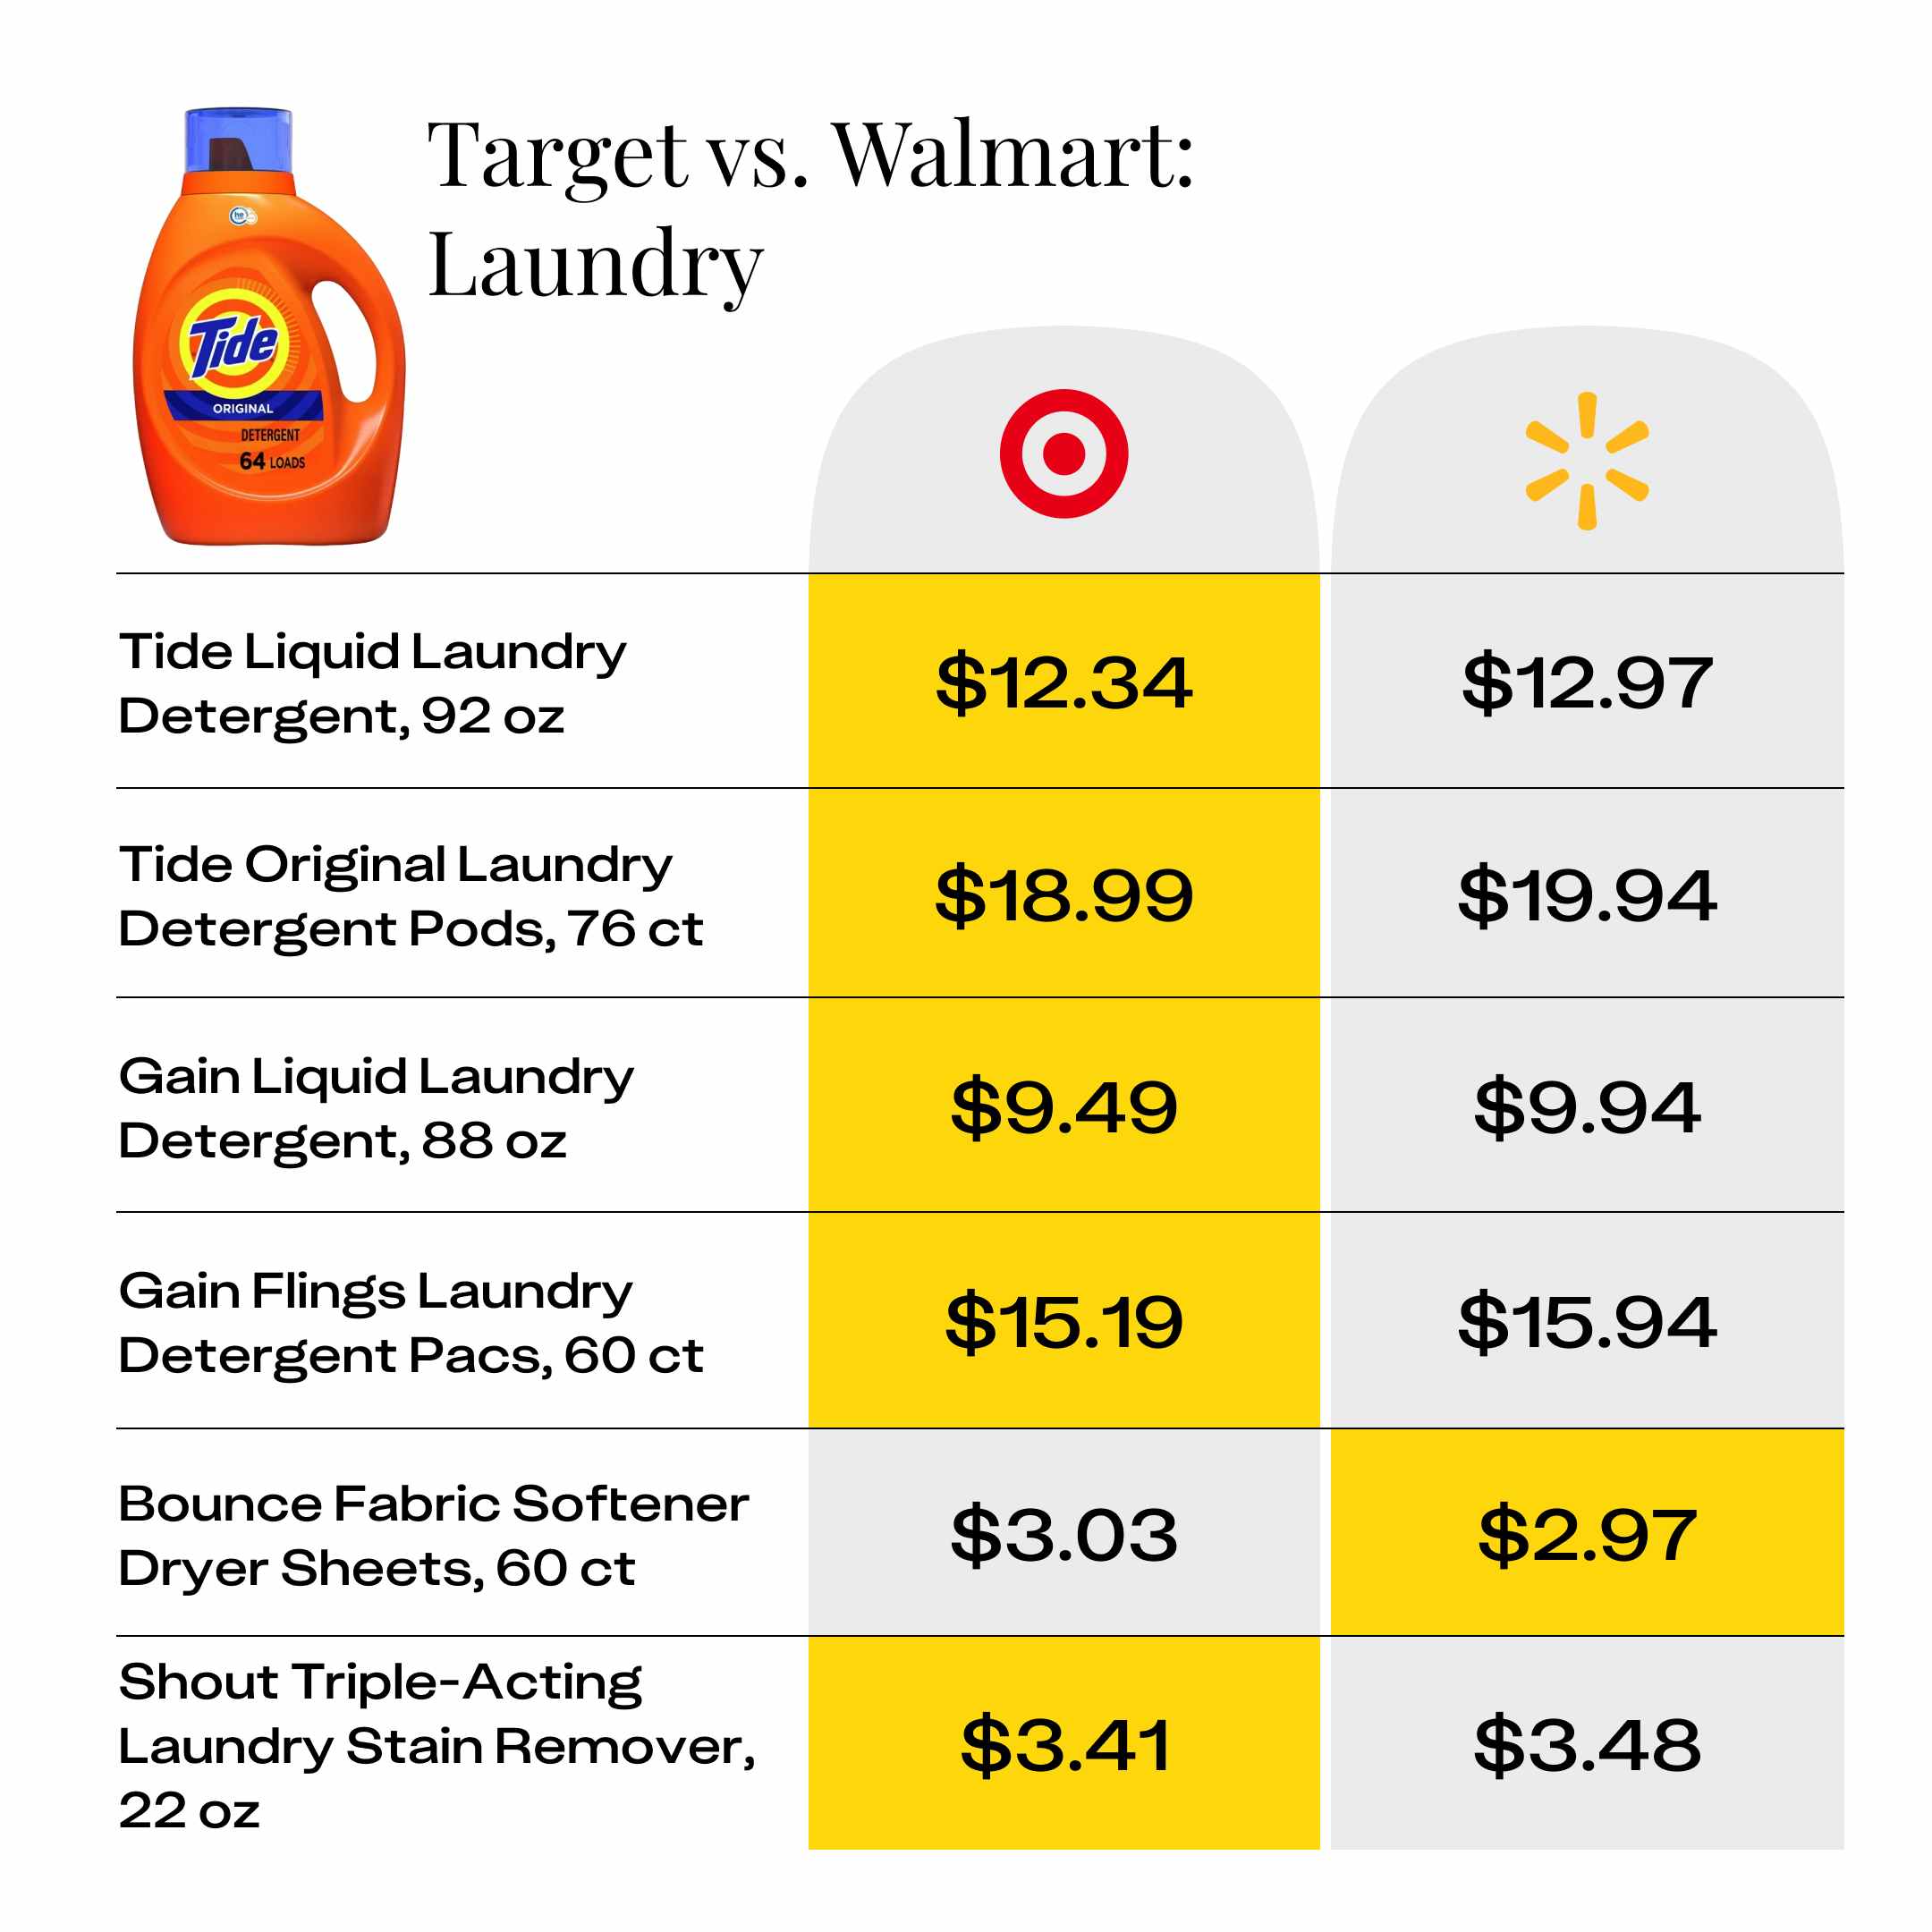 price comparison for laundry products at Target and Walmart